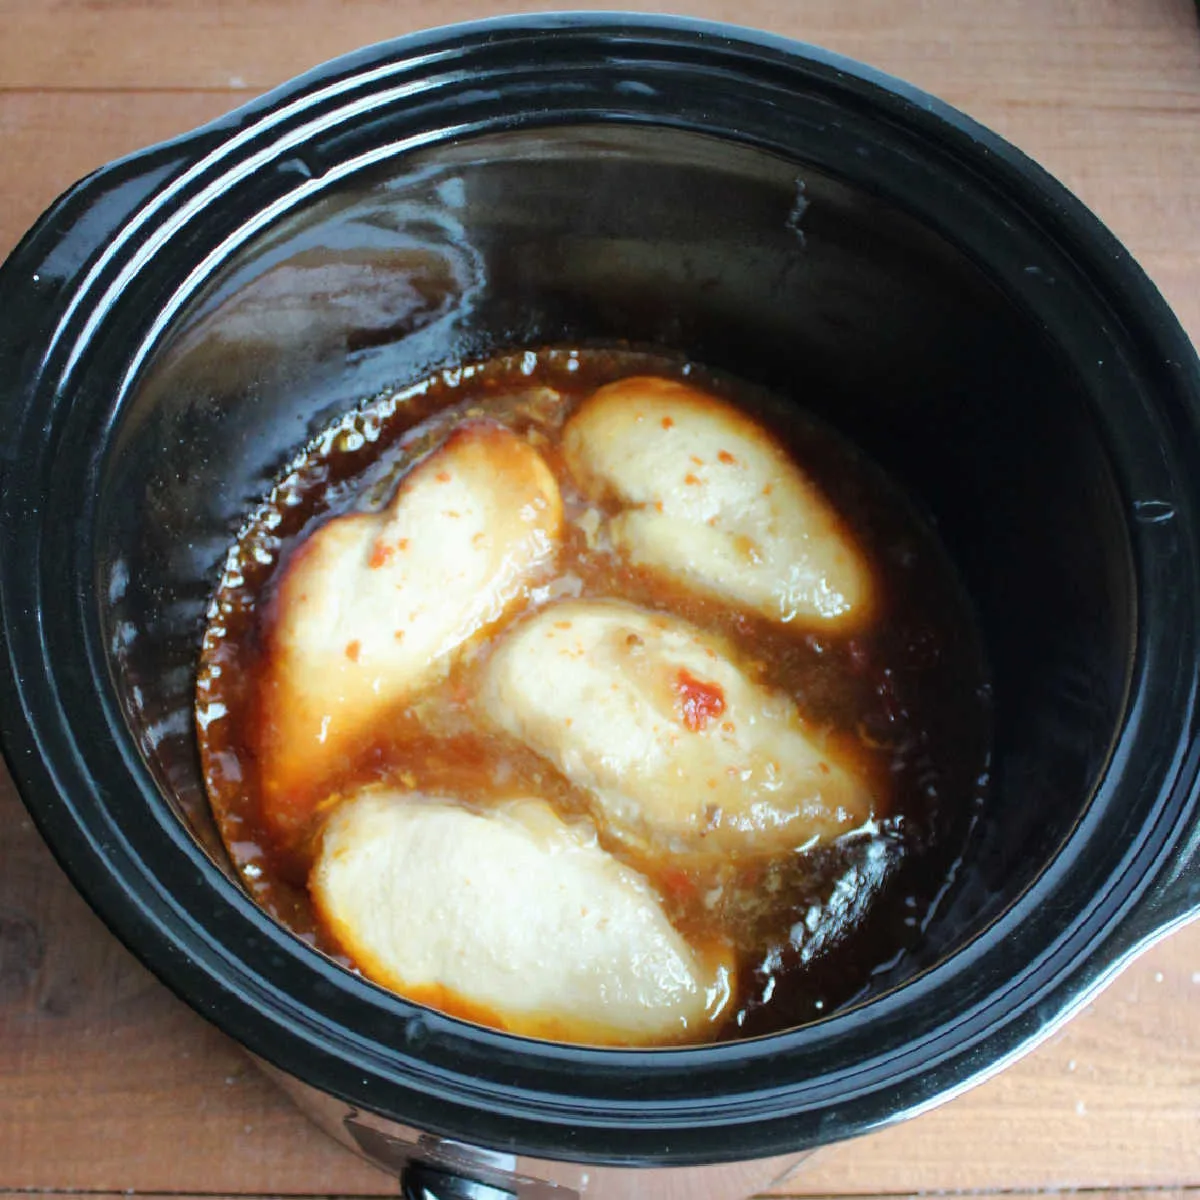 cooked whole chicken breasts in sauce inside crock pot.